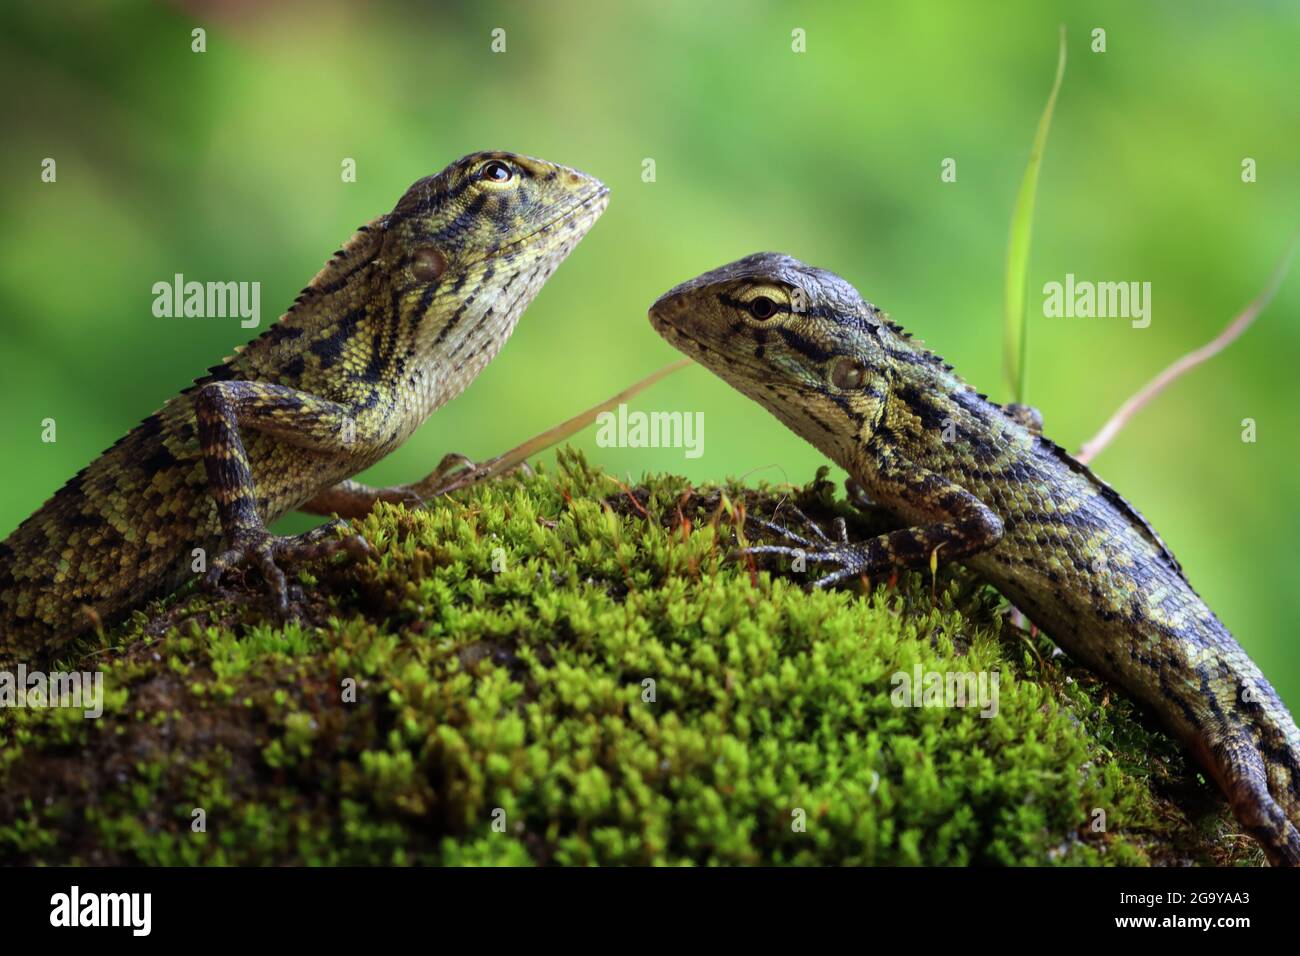 Two lizards on a mossy rock looking at each other, Indonesia Stock Photo